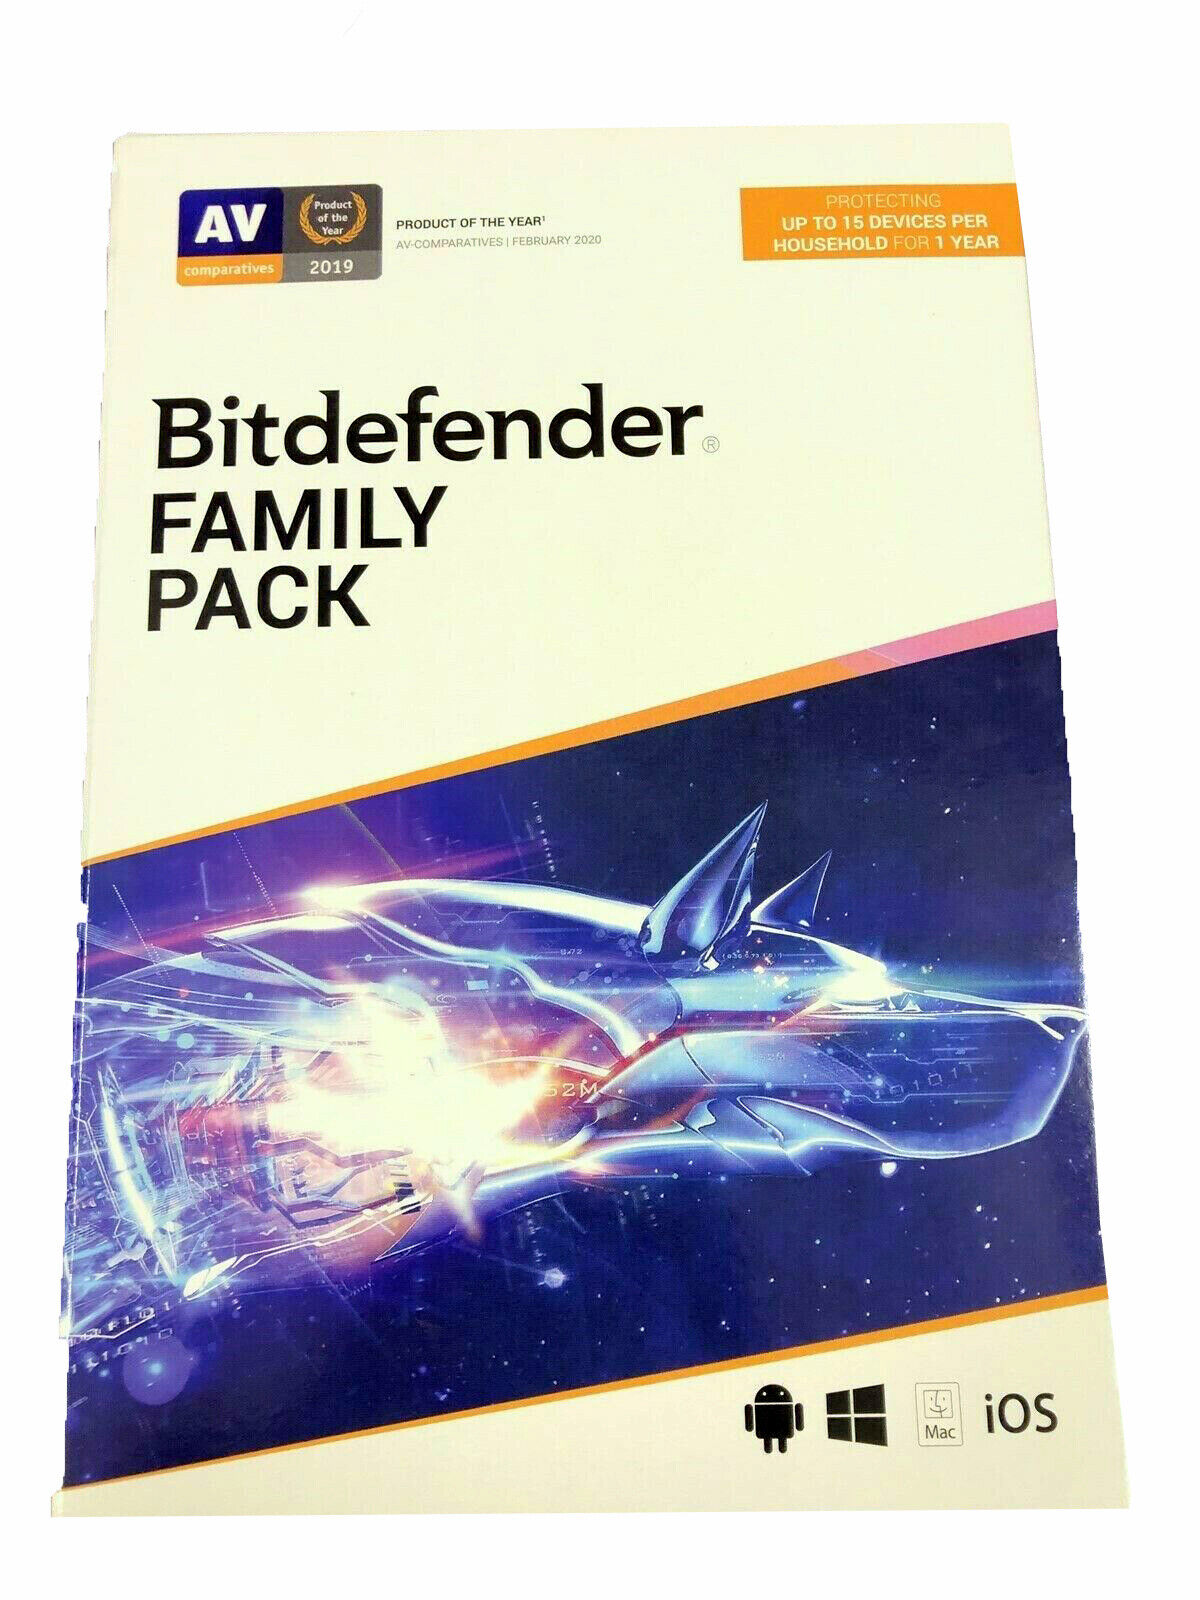 Bitdefender Family Pack 15 Devices Per Household for 1 Year (Latest Version)